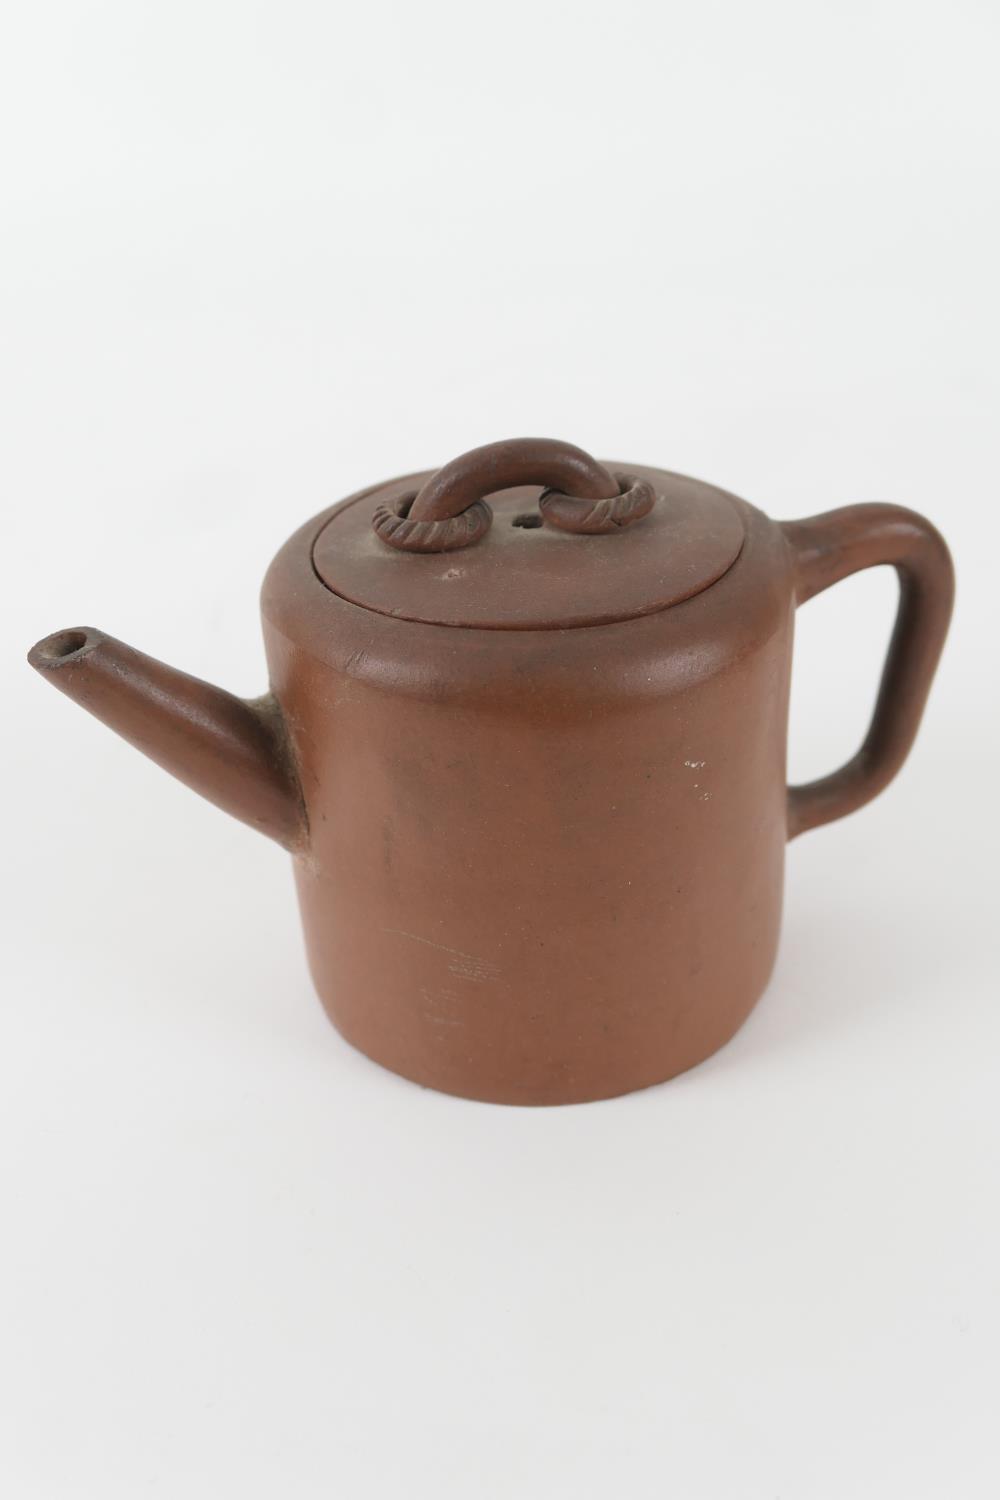 Chinese Yixing teapot, late 19th/early 20th Century, straight sided form, the handle with two